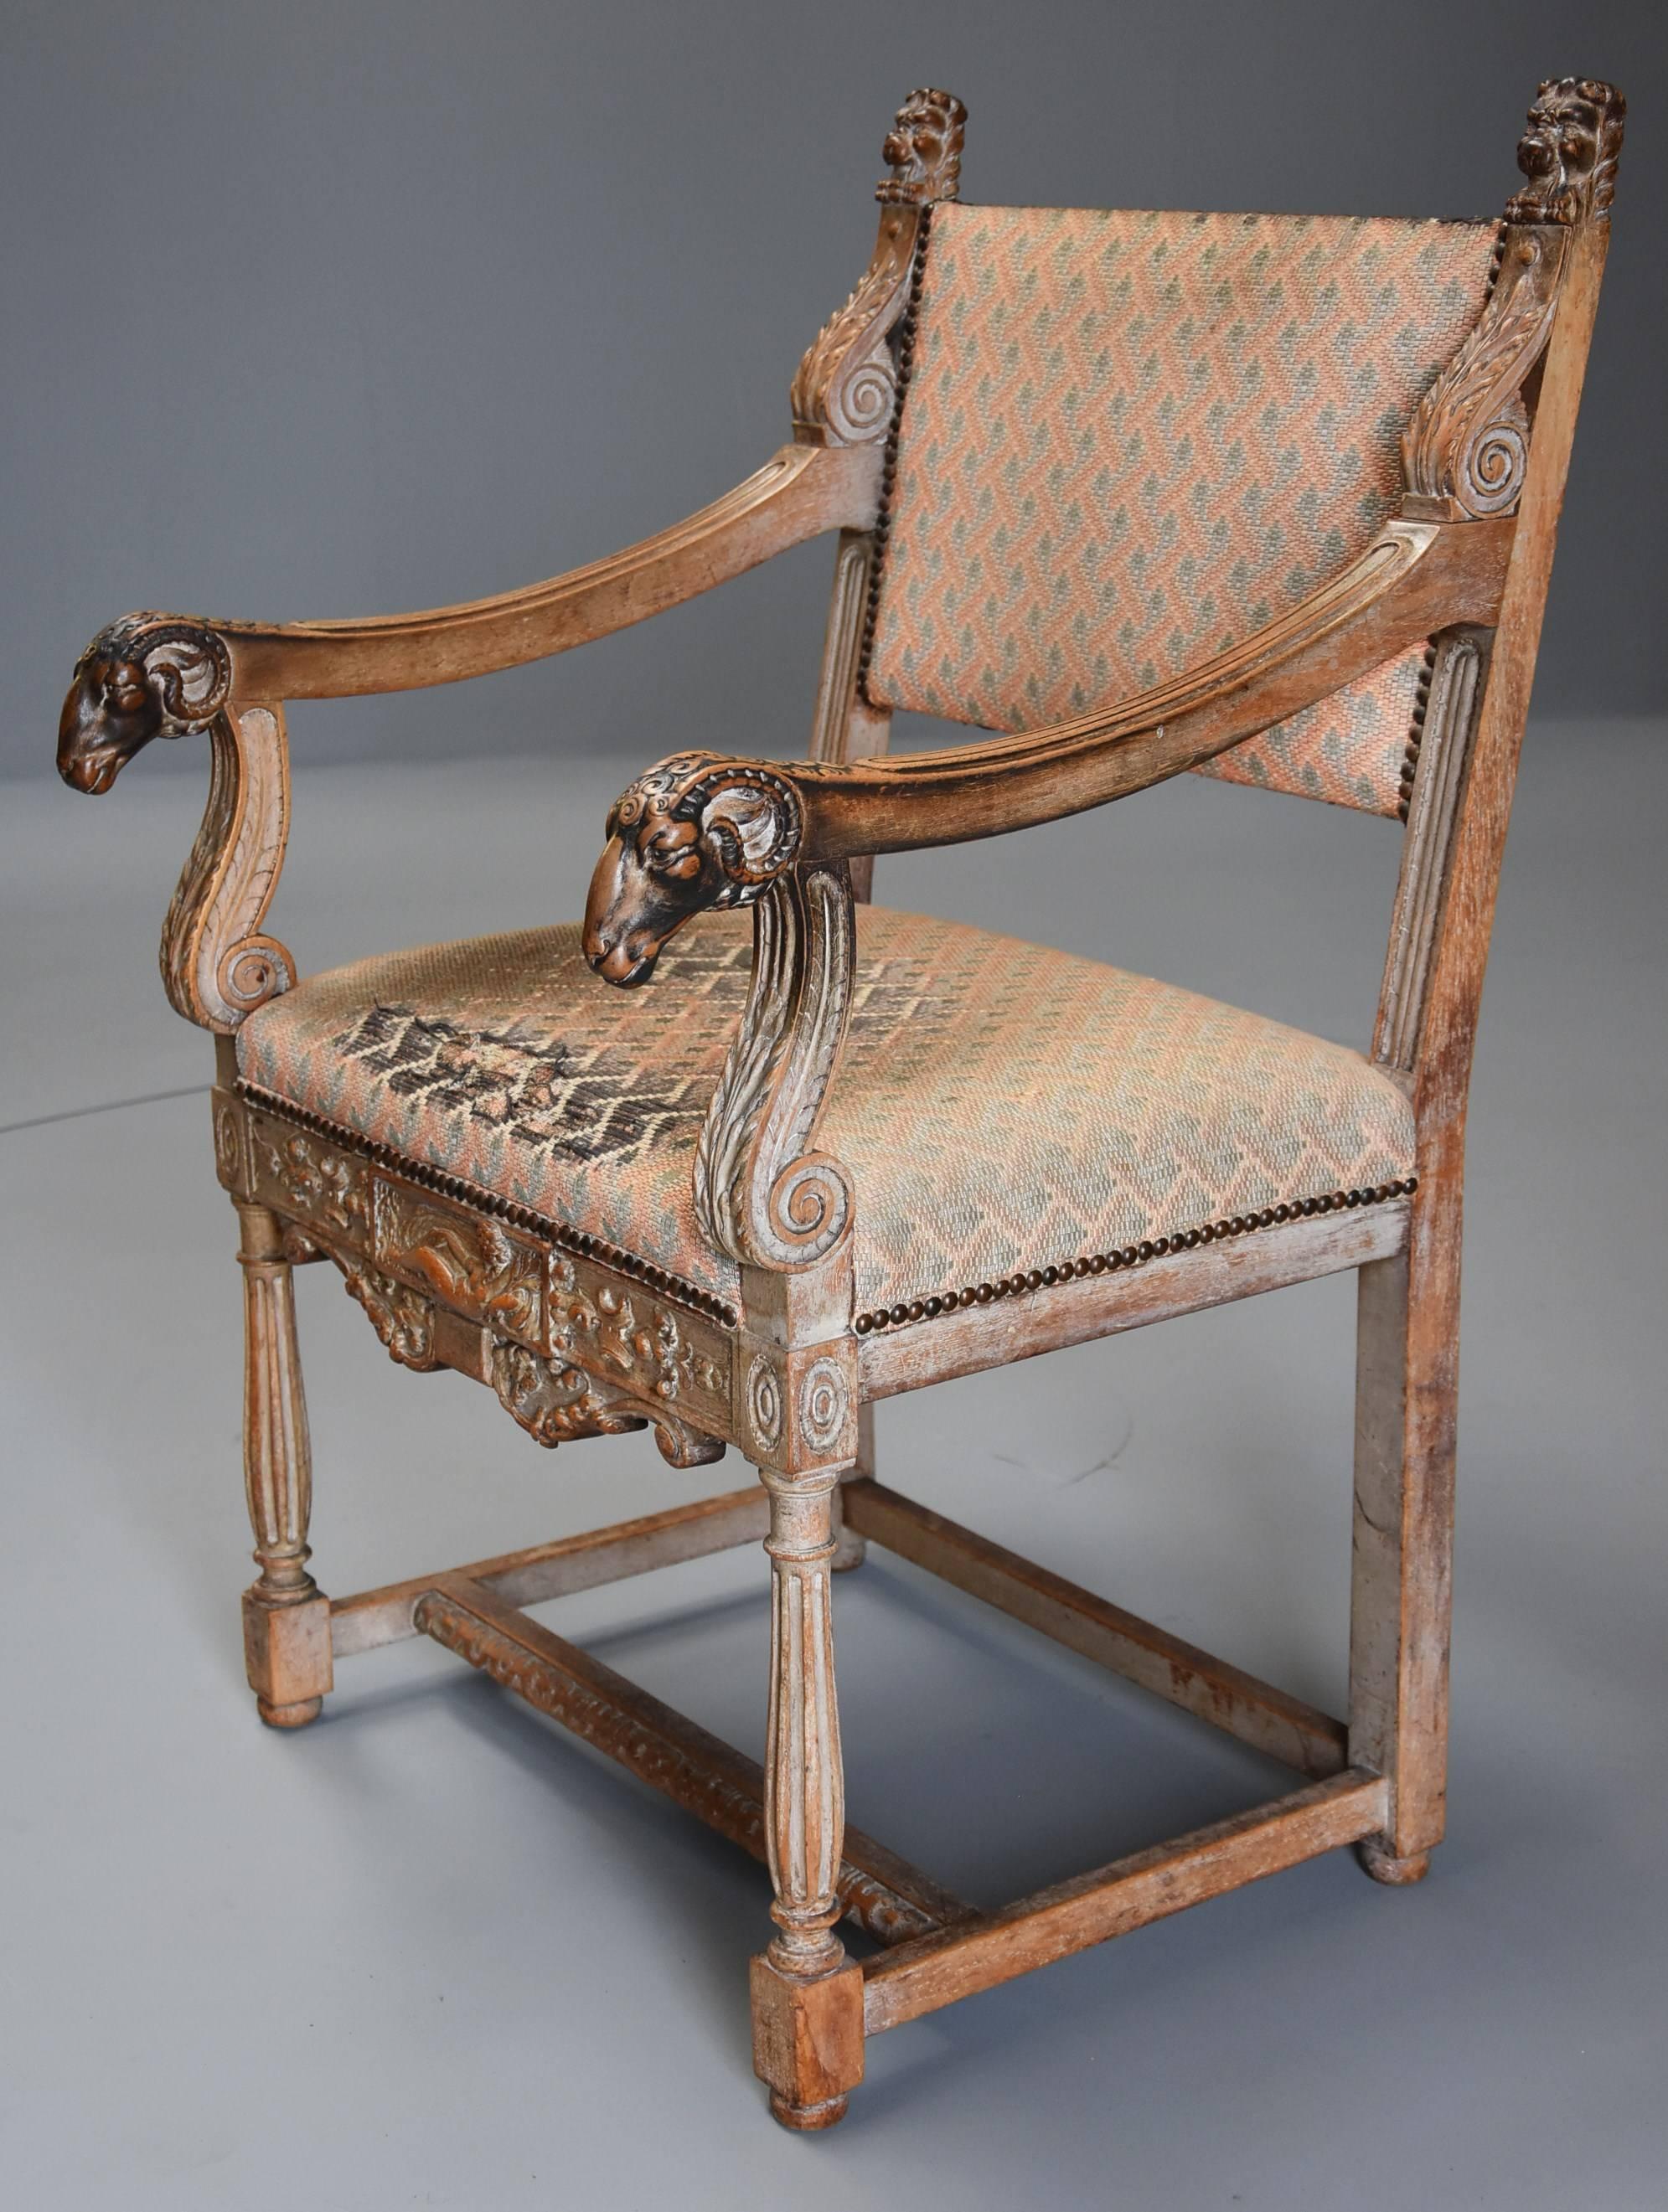 A late 19th century highly decorative French limed oak armchair in the Renaissance style, the rams head armrests with superb patina and retaining original tapestry upholstery (see below regarding re-upholstery).

This armchair consists of two